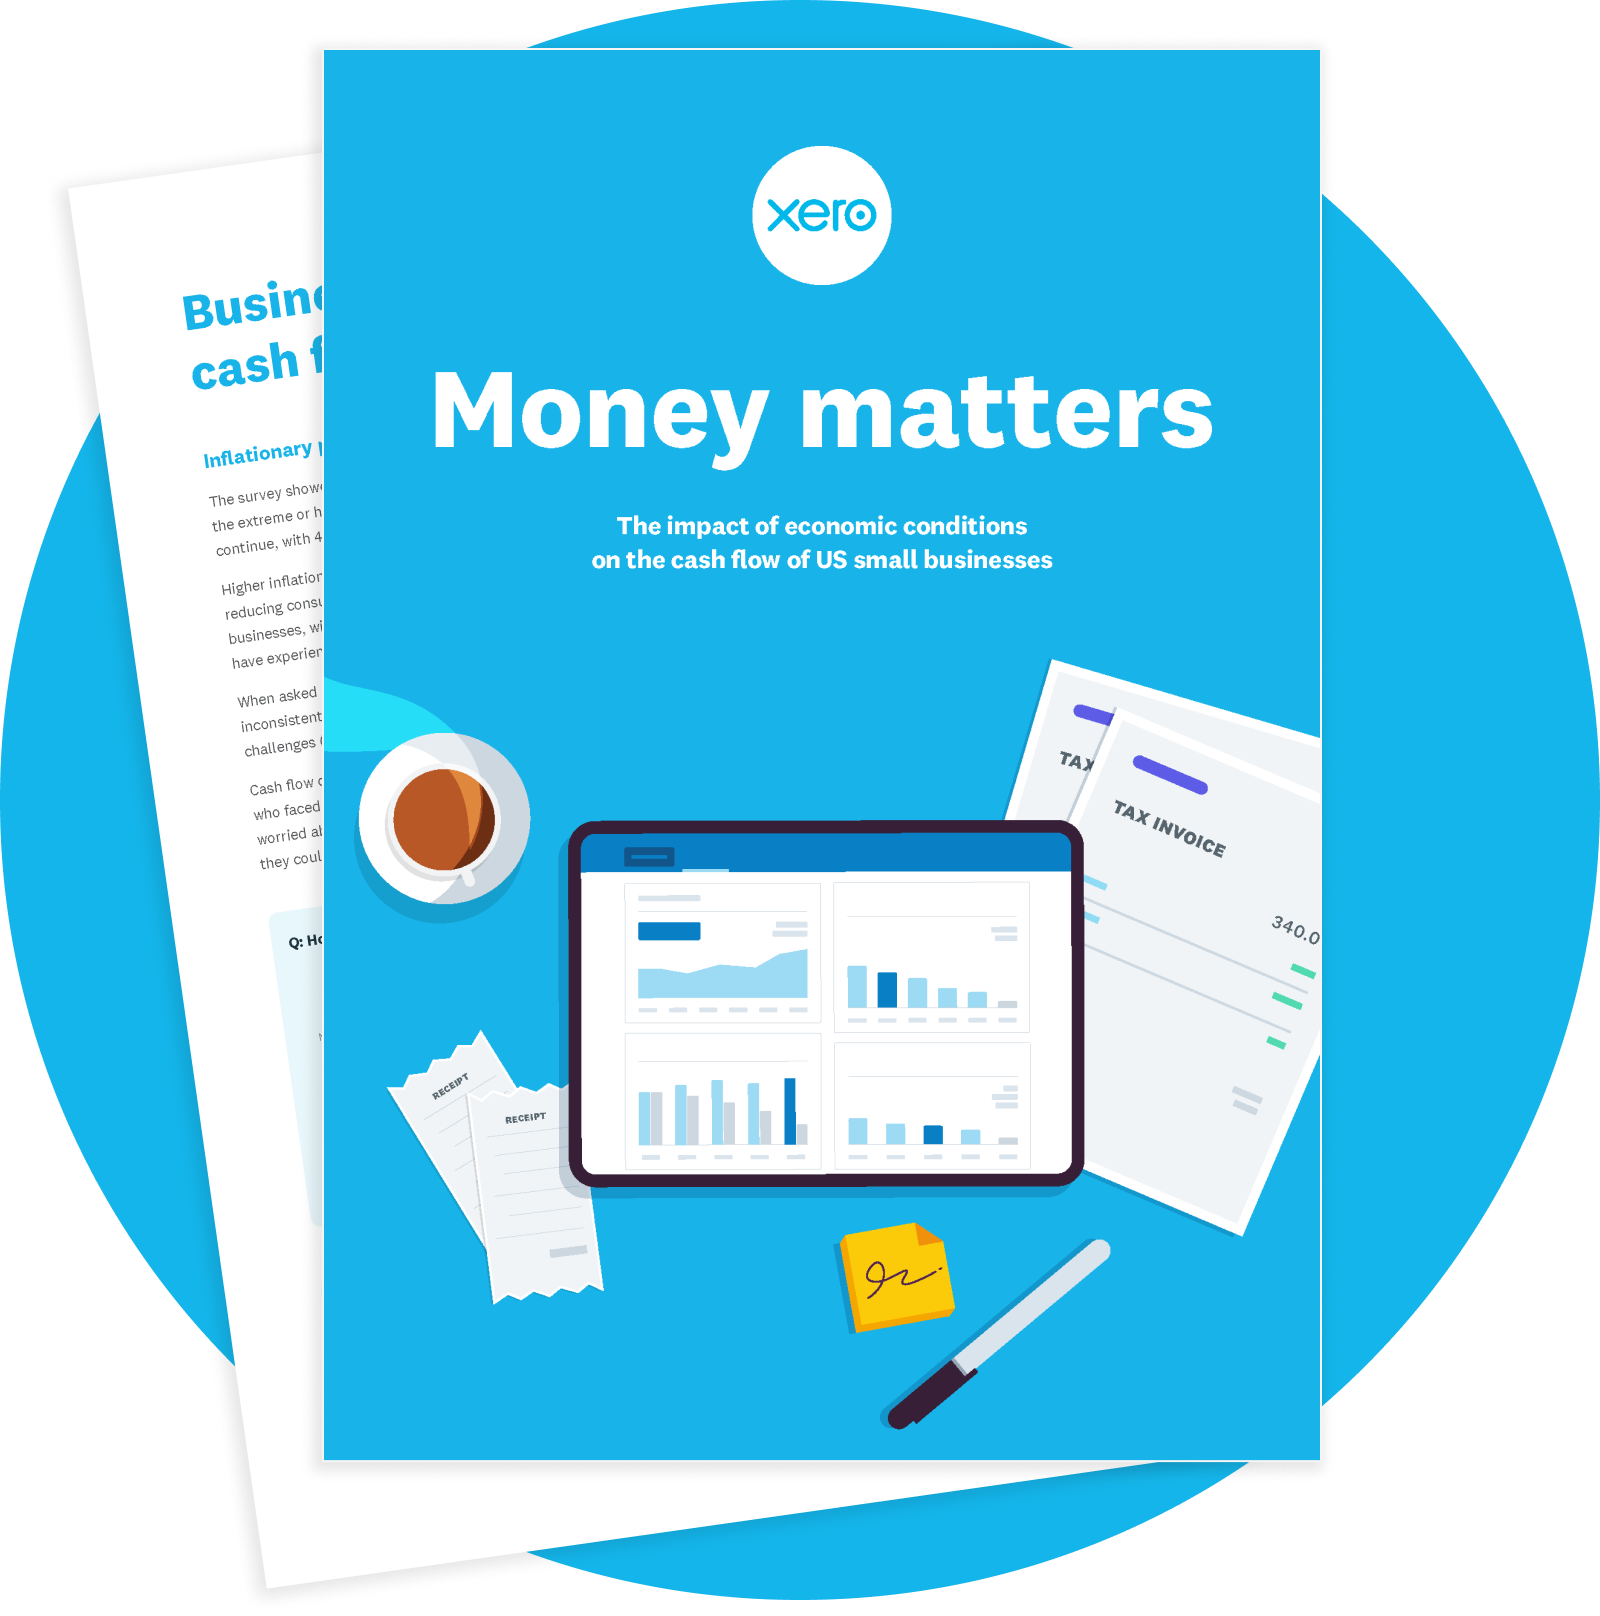 The cover of the Money matters report from Xero